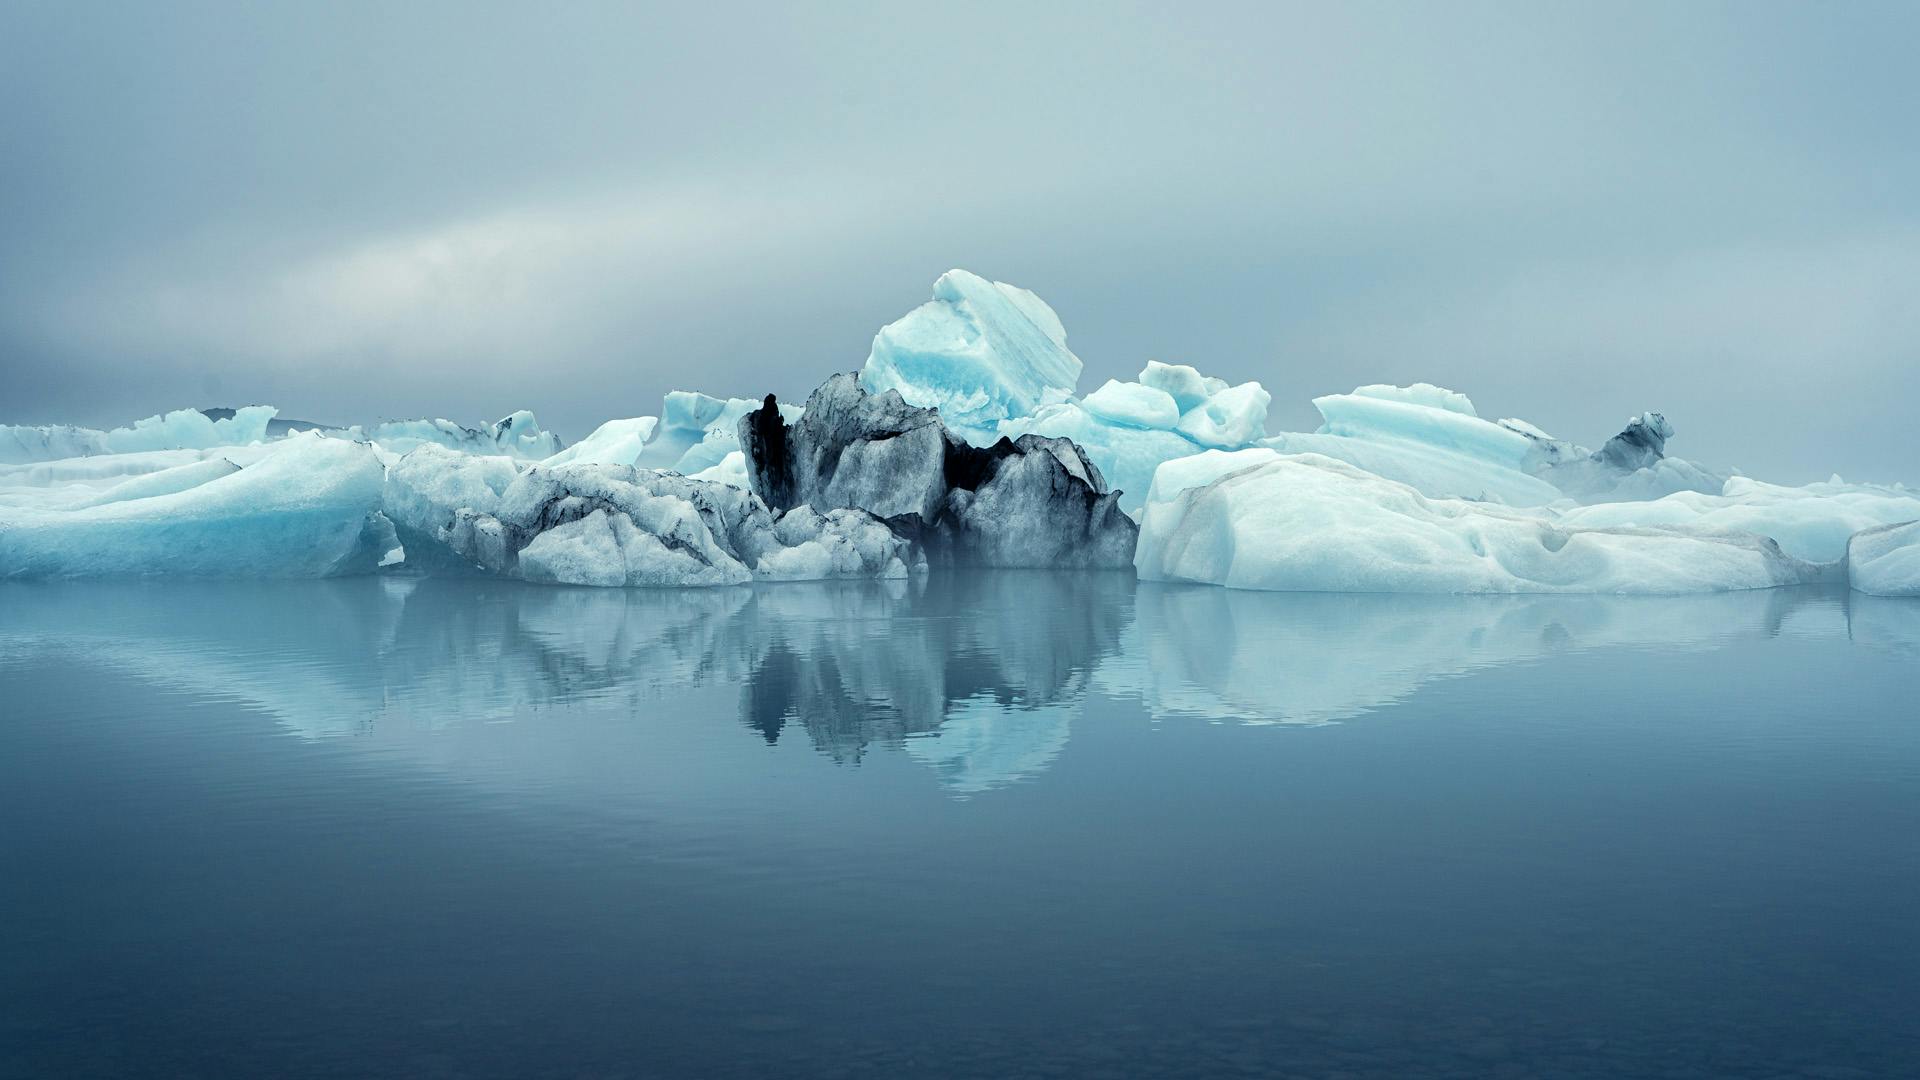 Glacial lagoon with floating icebergs creating a reflex in the calm water.